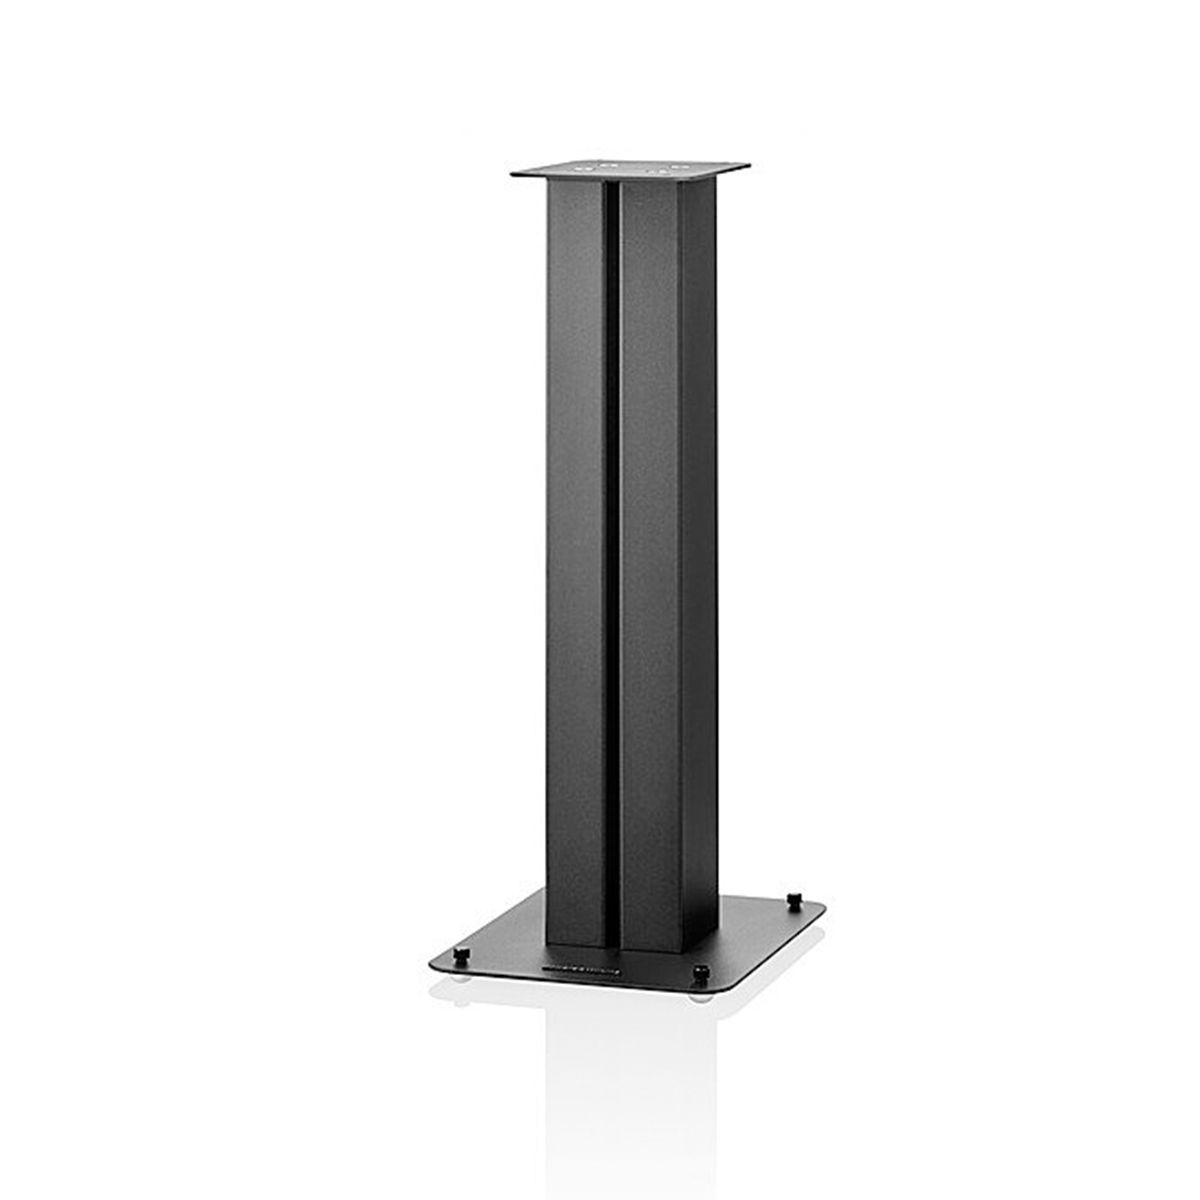 Bowers & Wilkins FS-600 S3 Speaker Stands - single black - angled front view